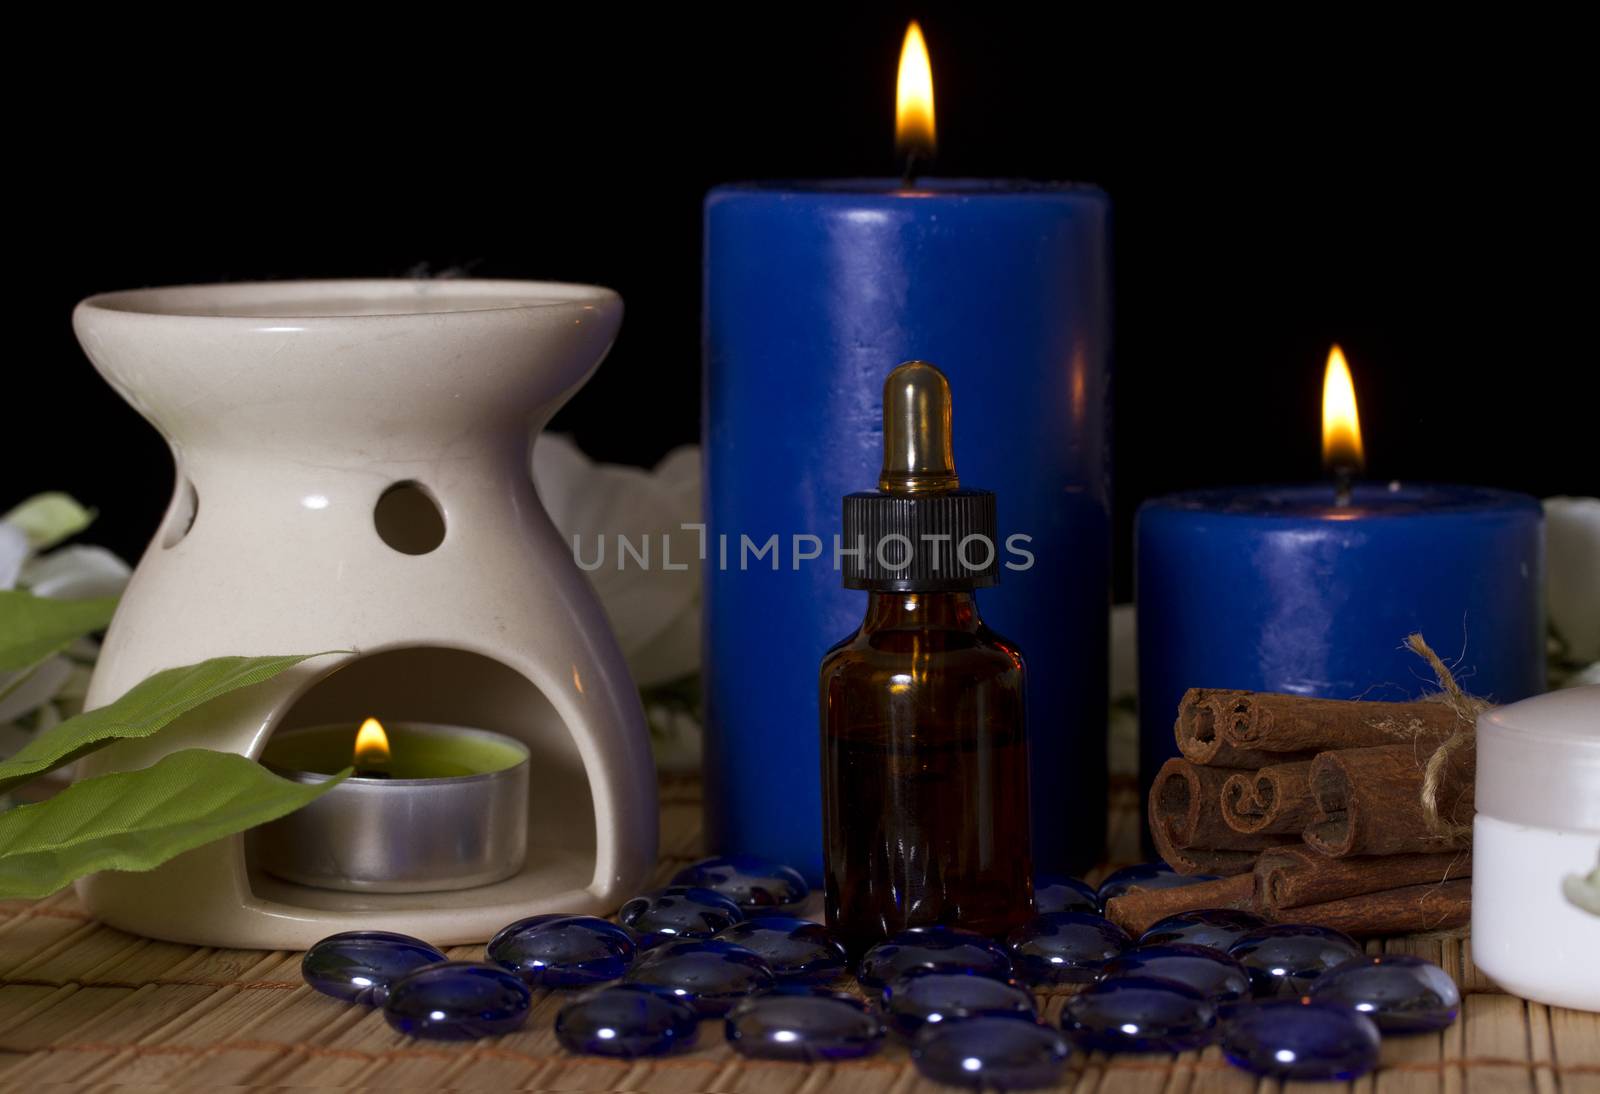 Spa accessories for massage treatments by Irina1977